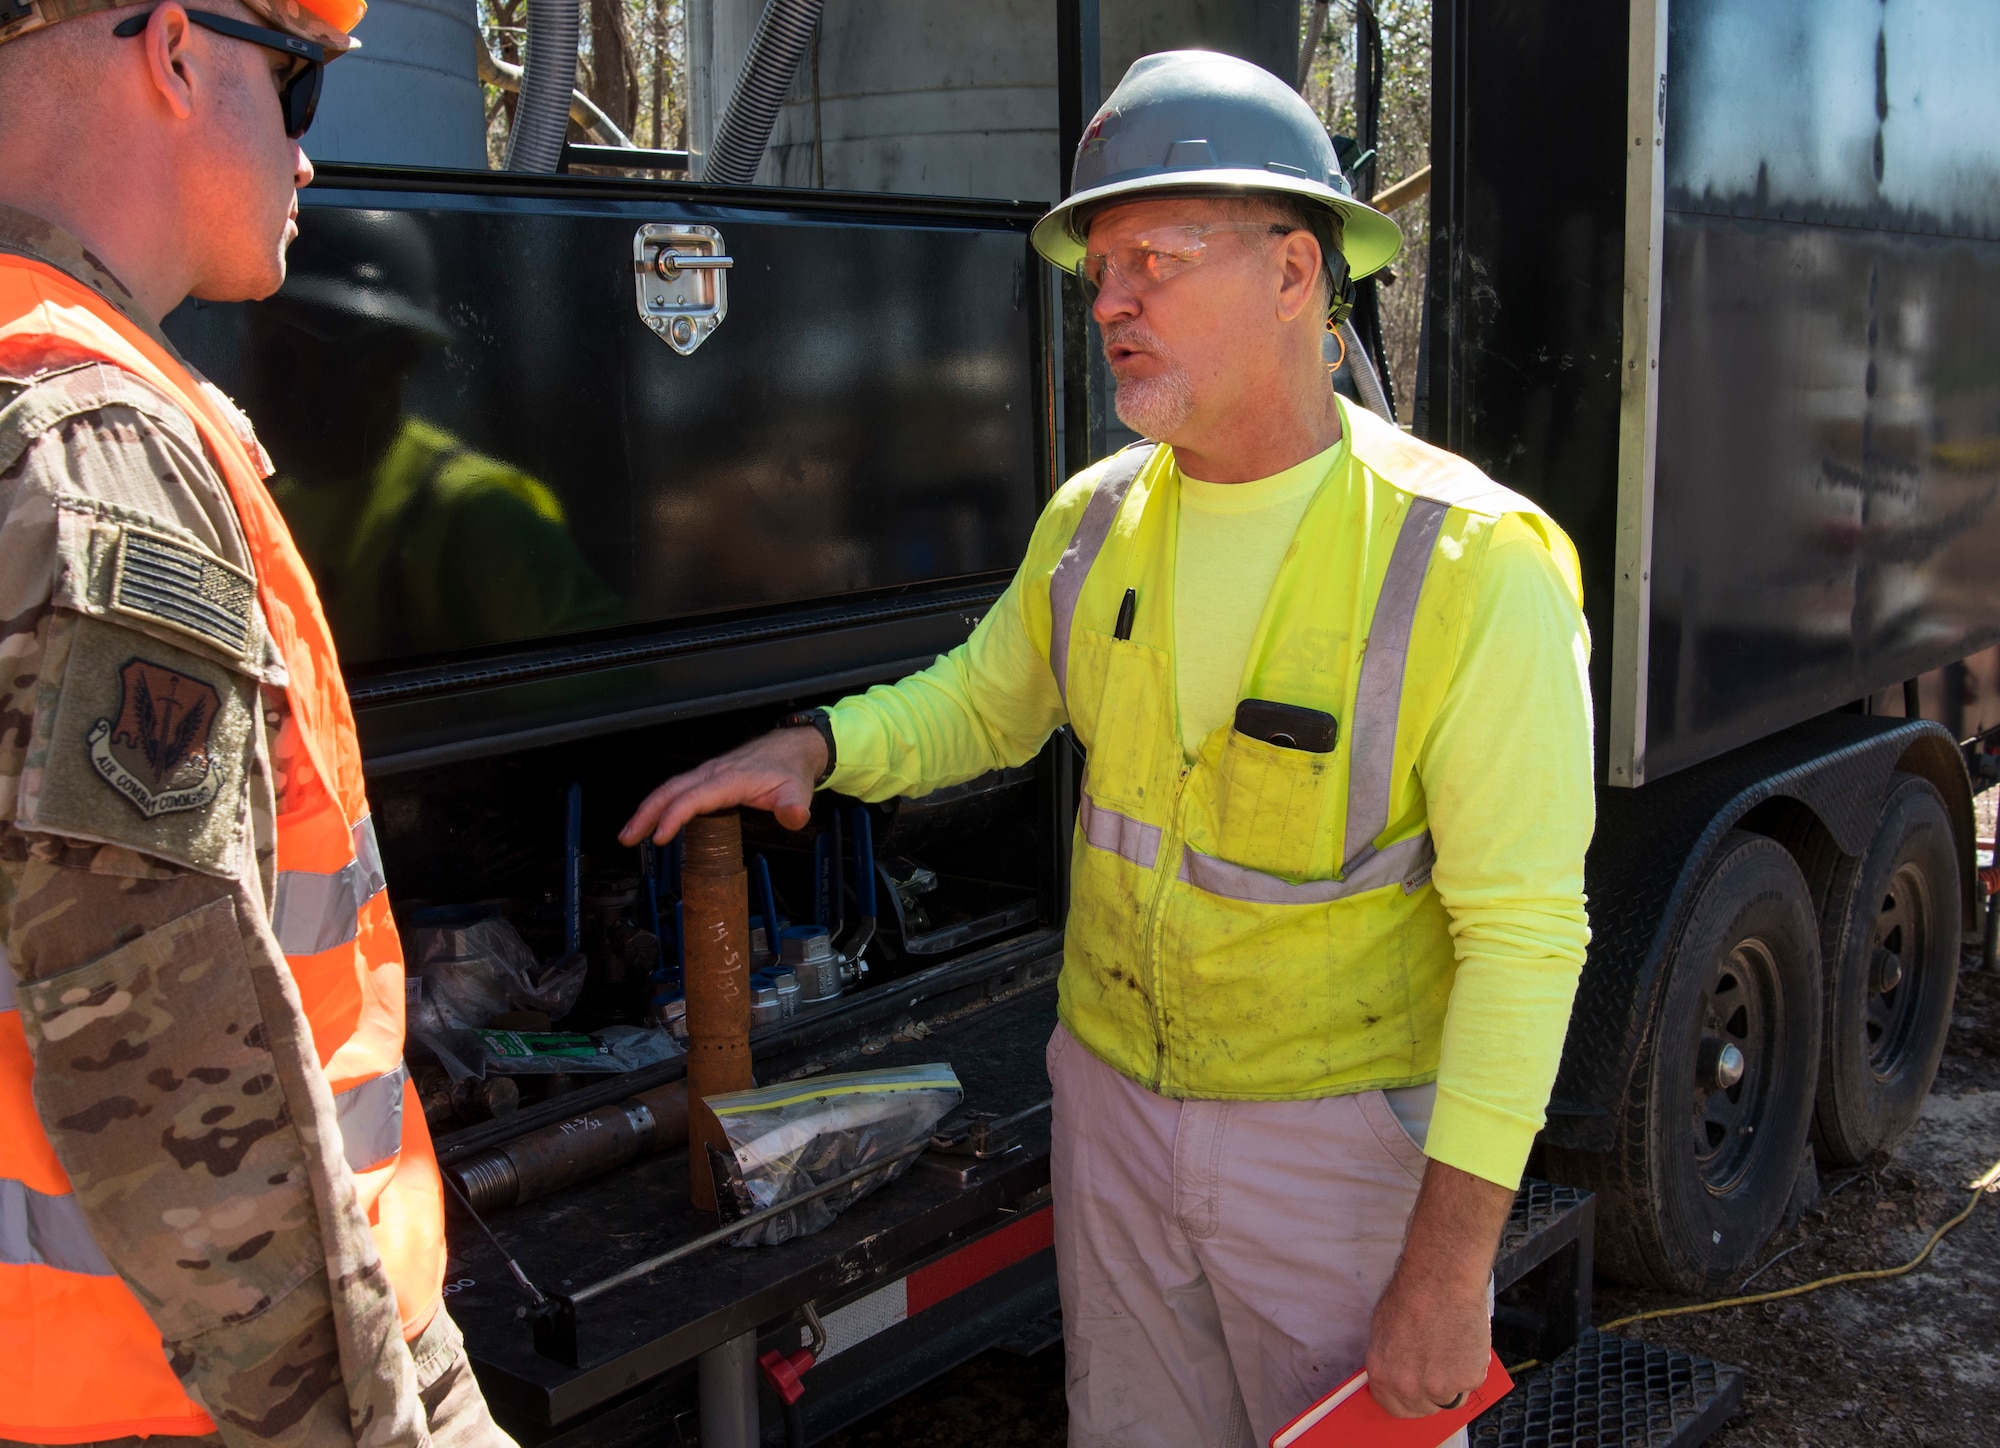 U.S. Air Force Maj. Brandon Goebel, 20th Civil Engineer Squadron commander, left, and Gary Simpson, AST Environmental project manager, discuss how the Enhanced Environmental Cleanup Technology, BOS 100® Treatment Barrier is injected at Sans Souci Farm in Sumter, S.C., March 7, 2019.